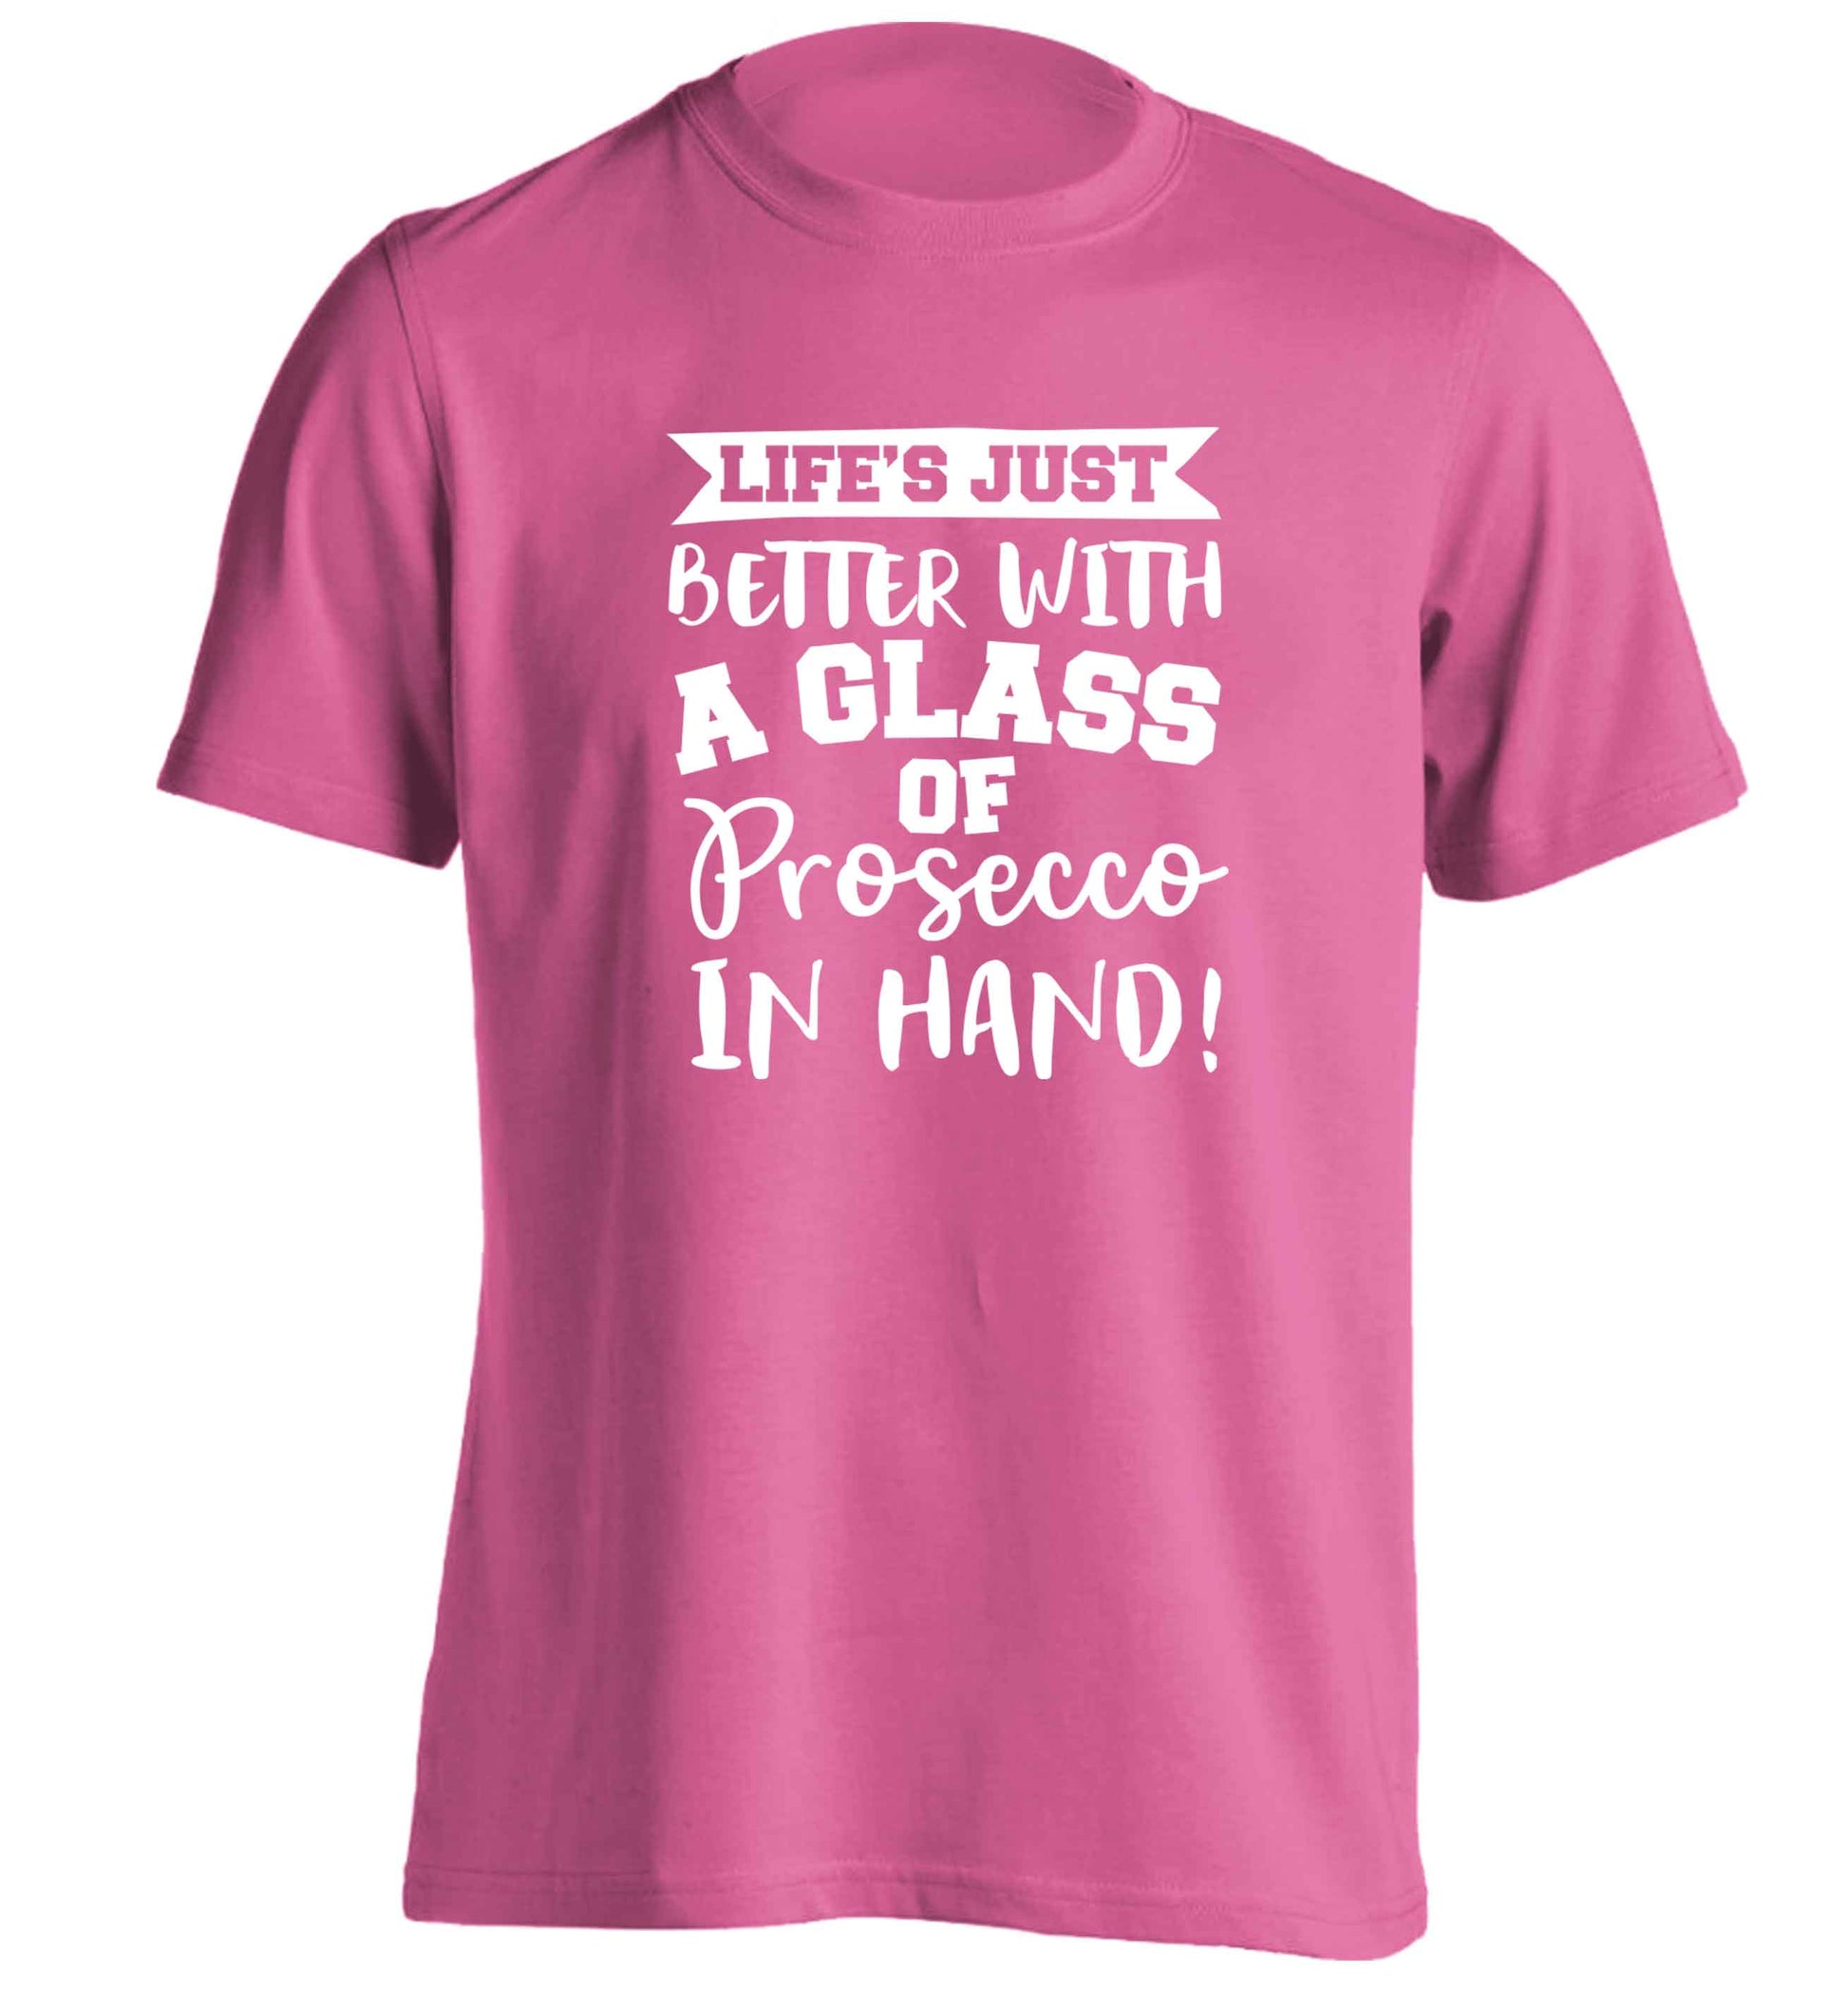 Life's just better with a glass of prosecco in hand adults unisex pink Tshirt 2XL